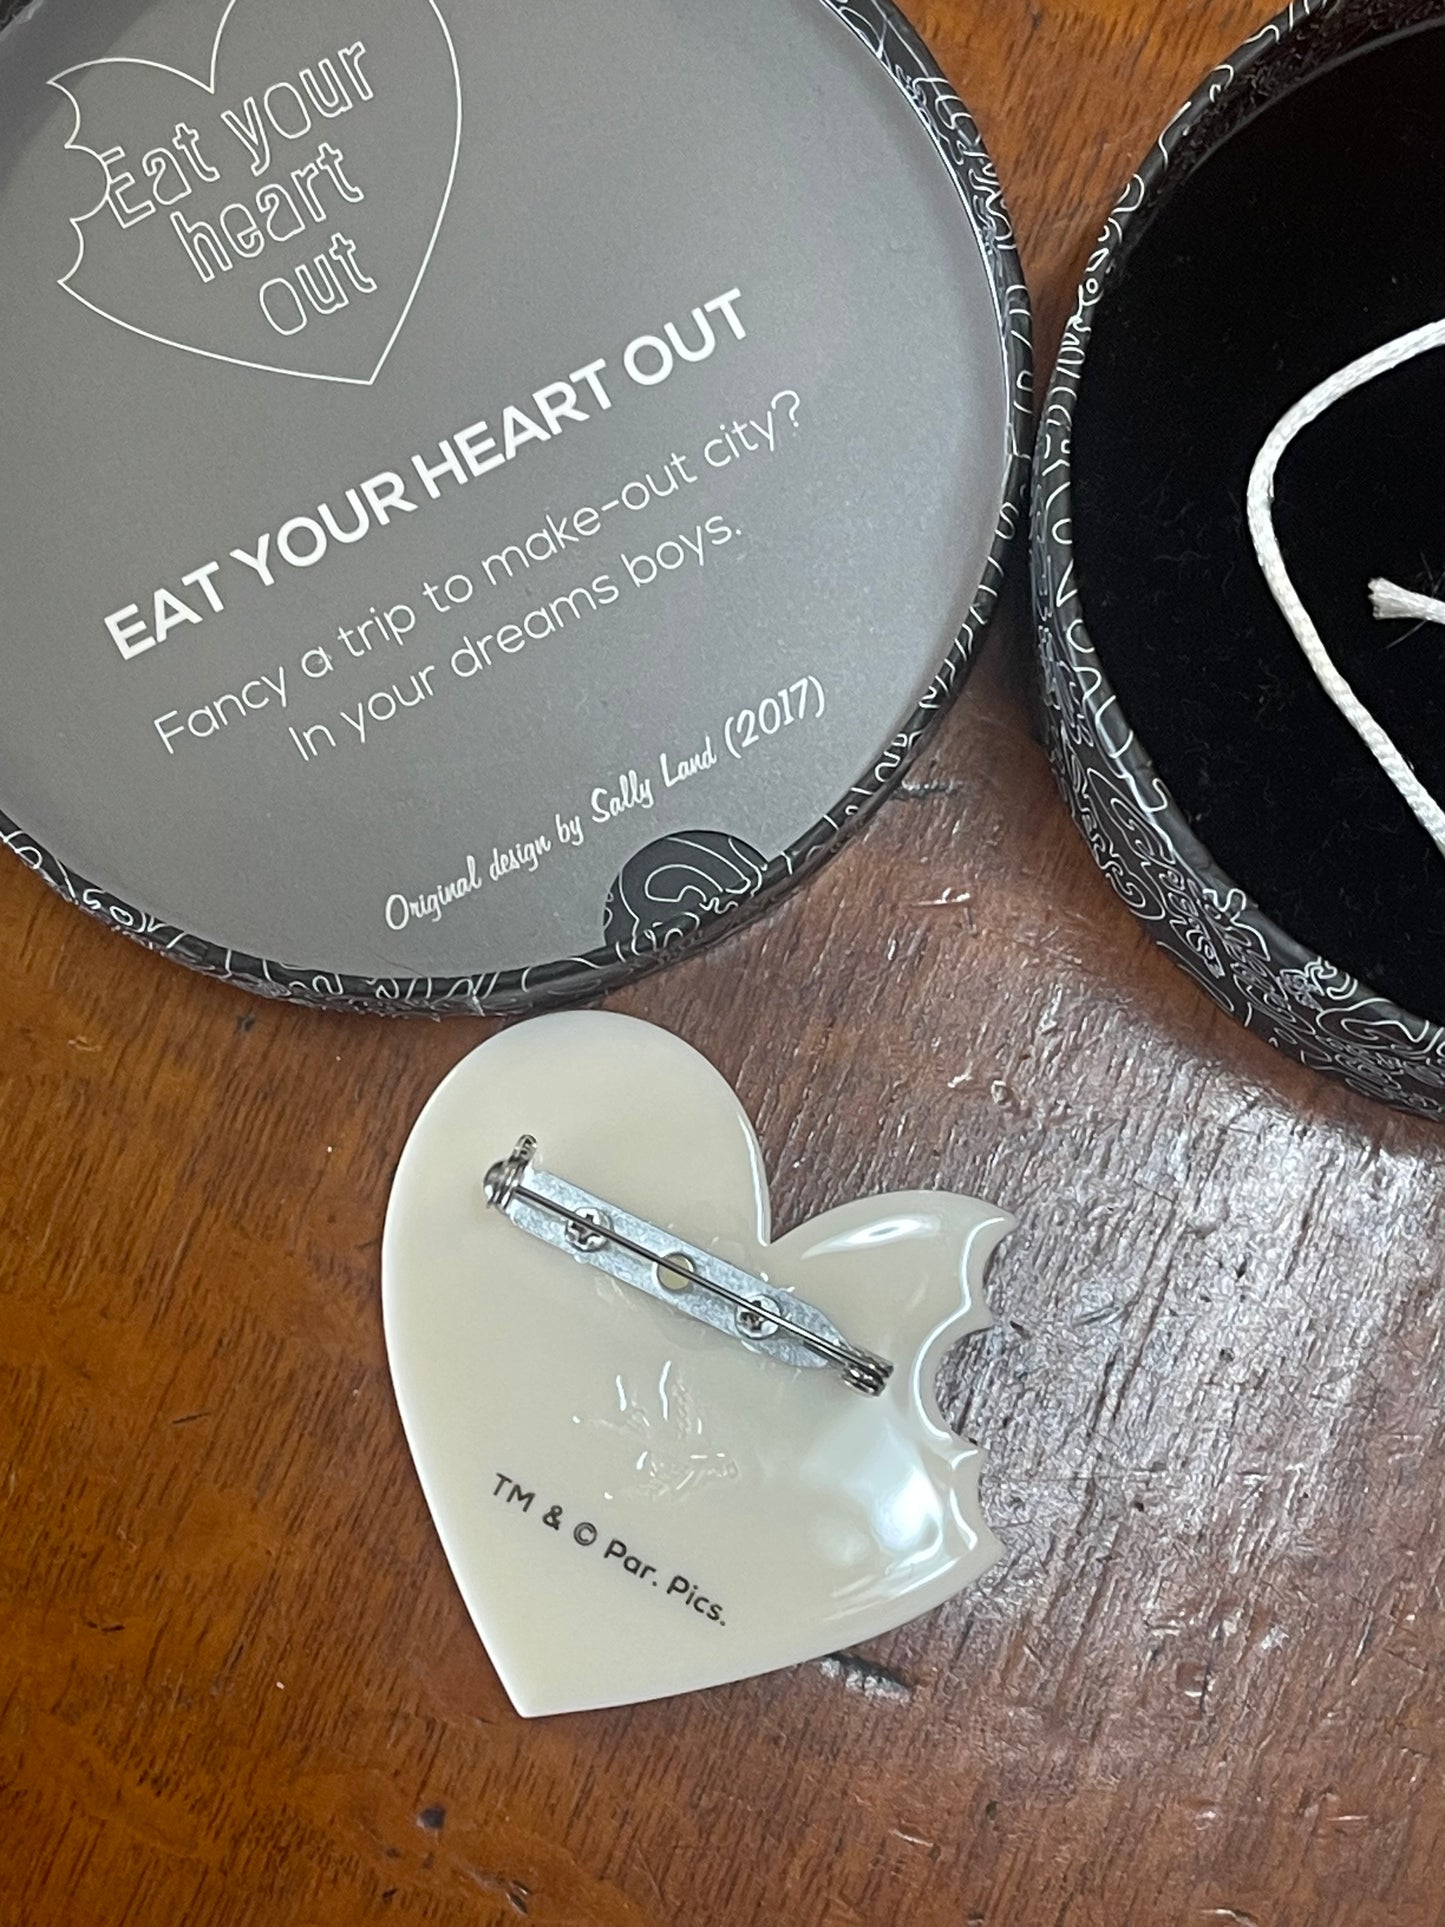 Eat Your Heart Out Grease Brooch by Erstwilder and Sally Land (2017)